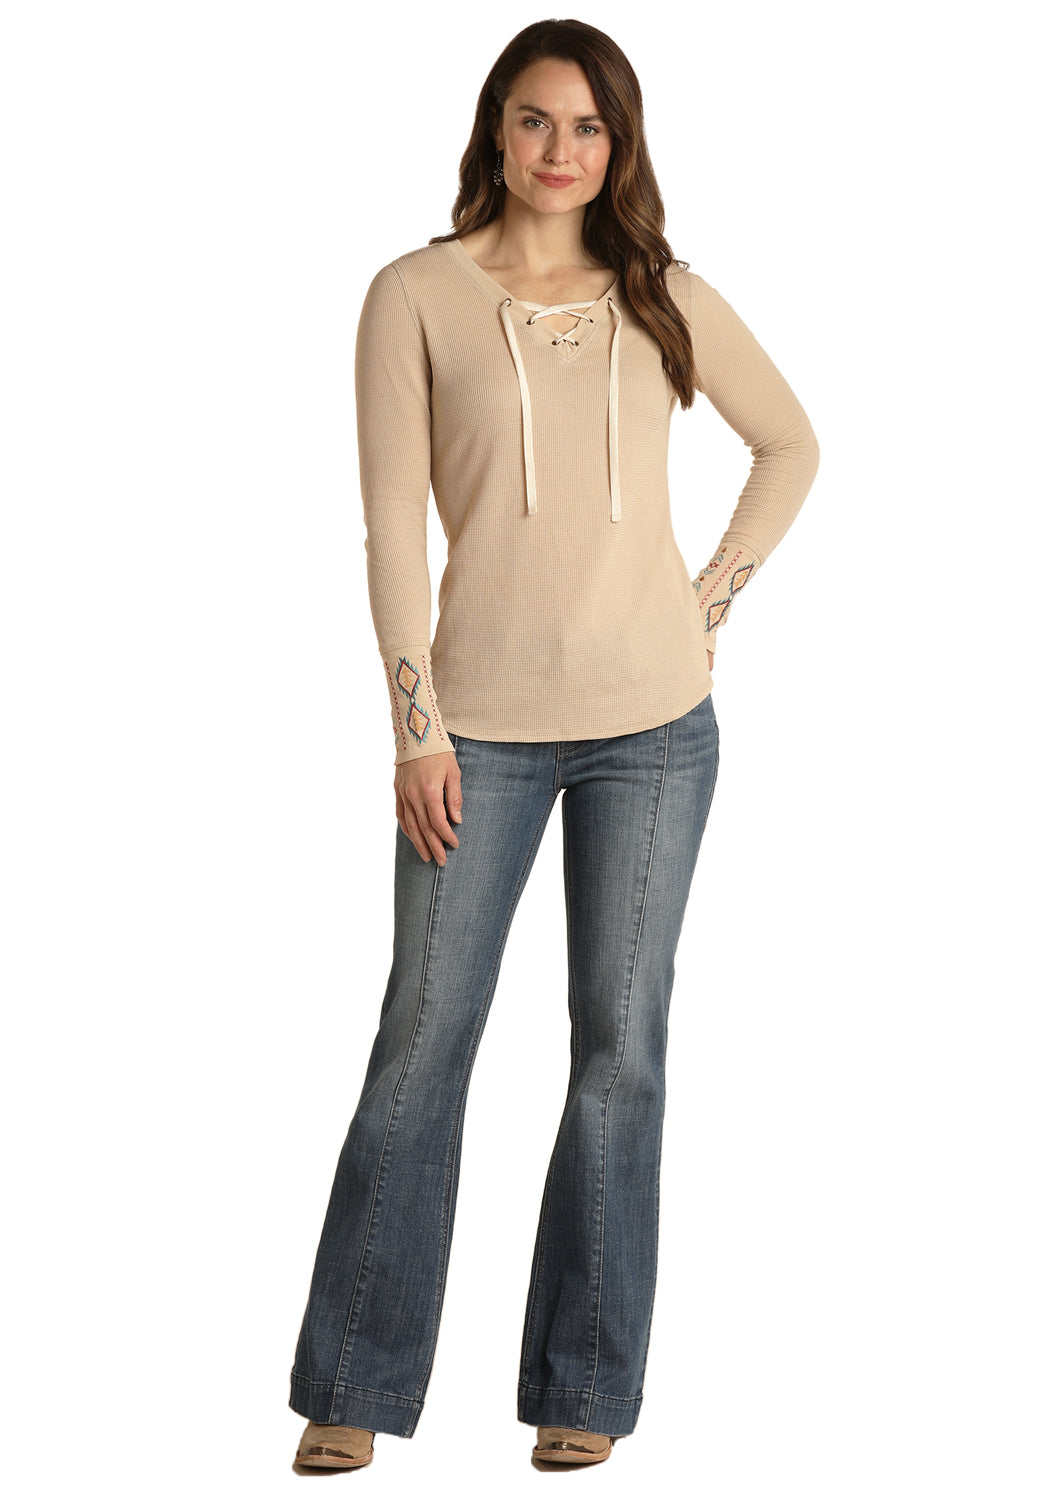 Panhandle Slim® Women's Laced Neck Long Sleeve Thermal Top